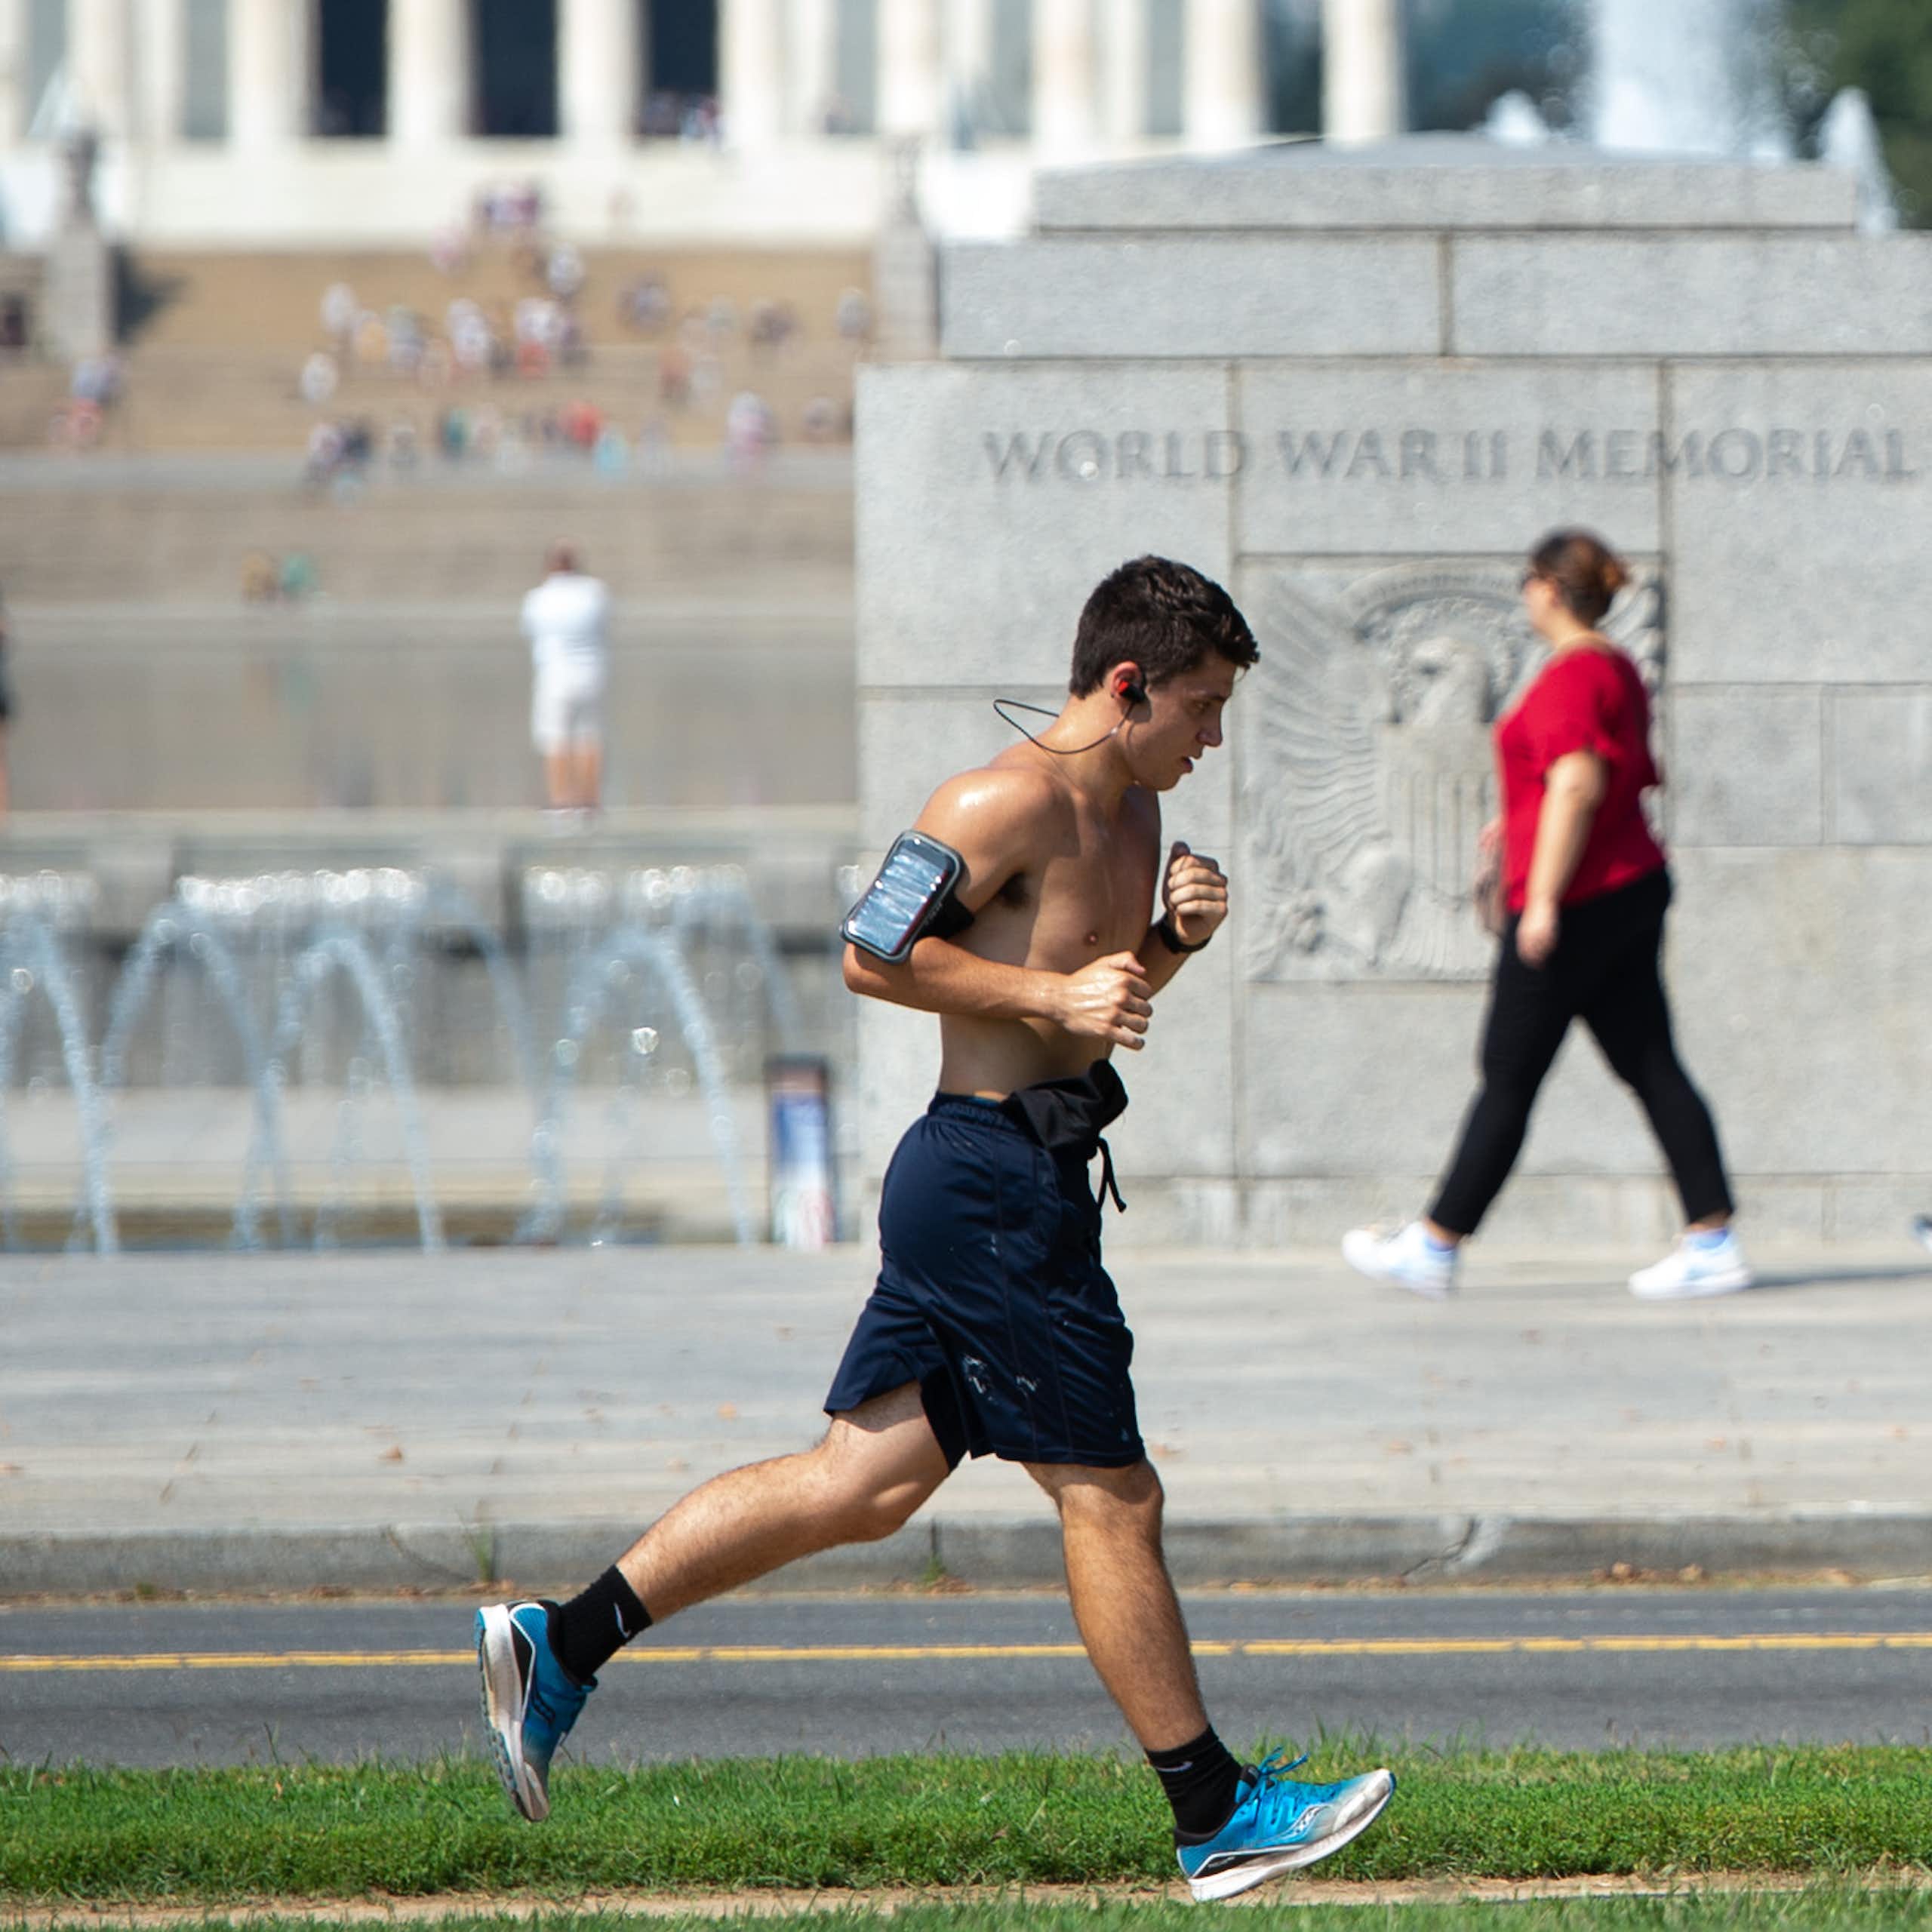 A man runs past the WWII Memorial on a hot day in Washington, D.C., with the Lincoln Memorial in the background